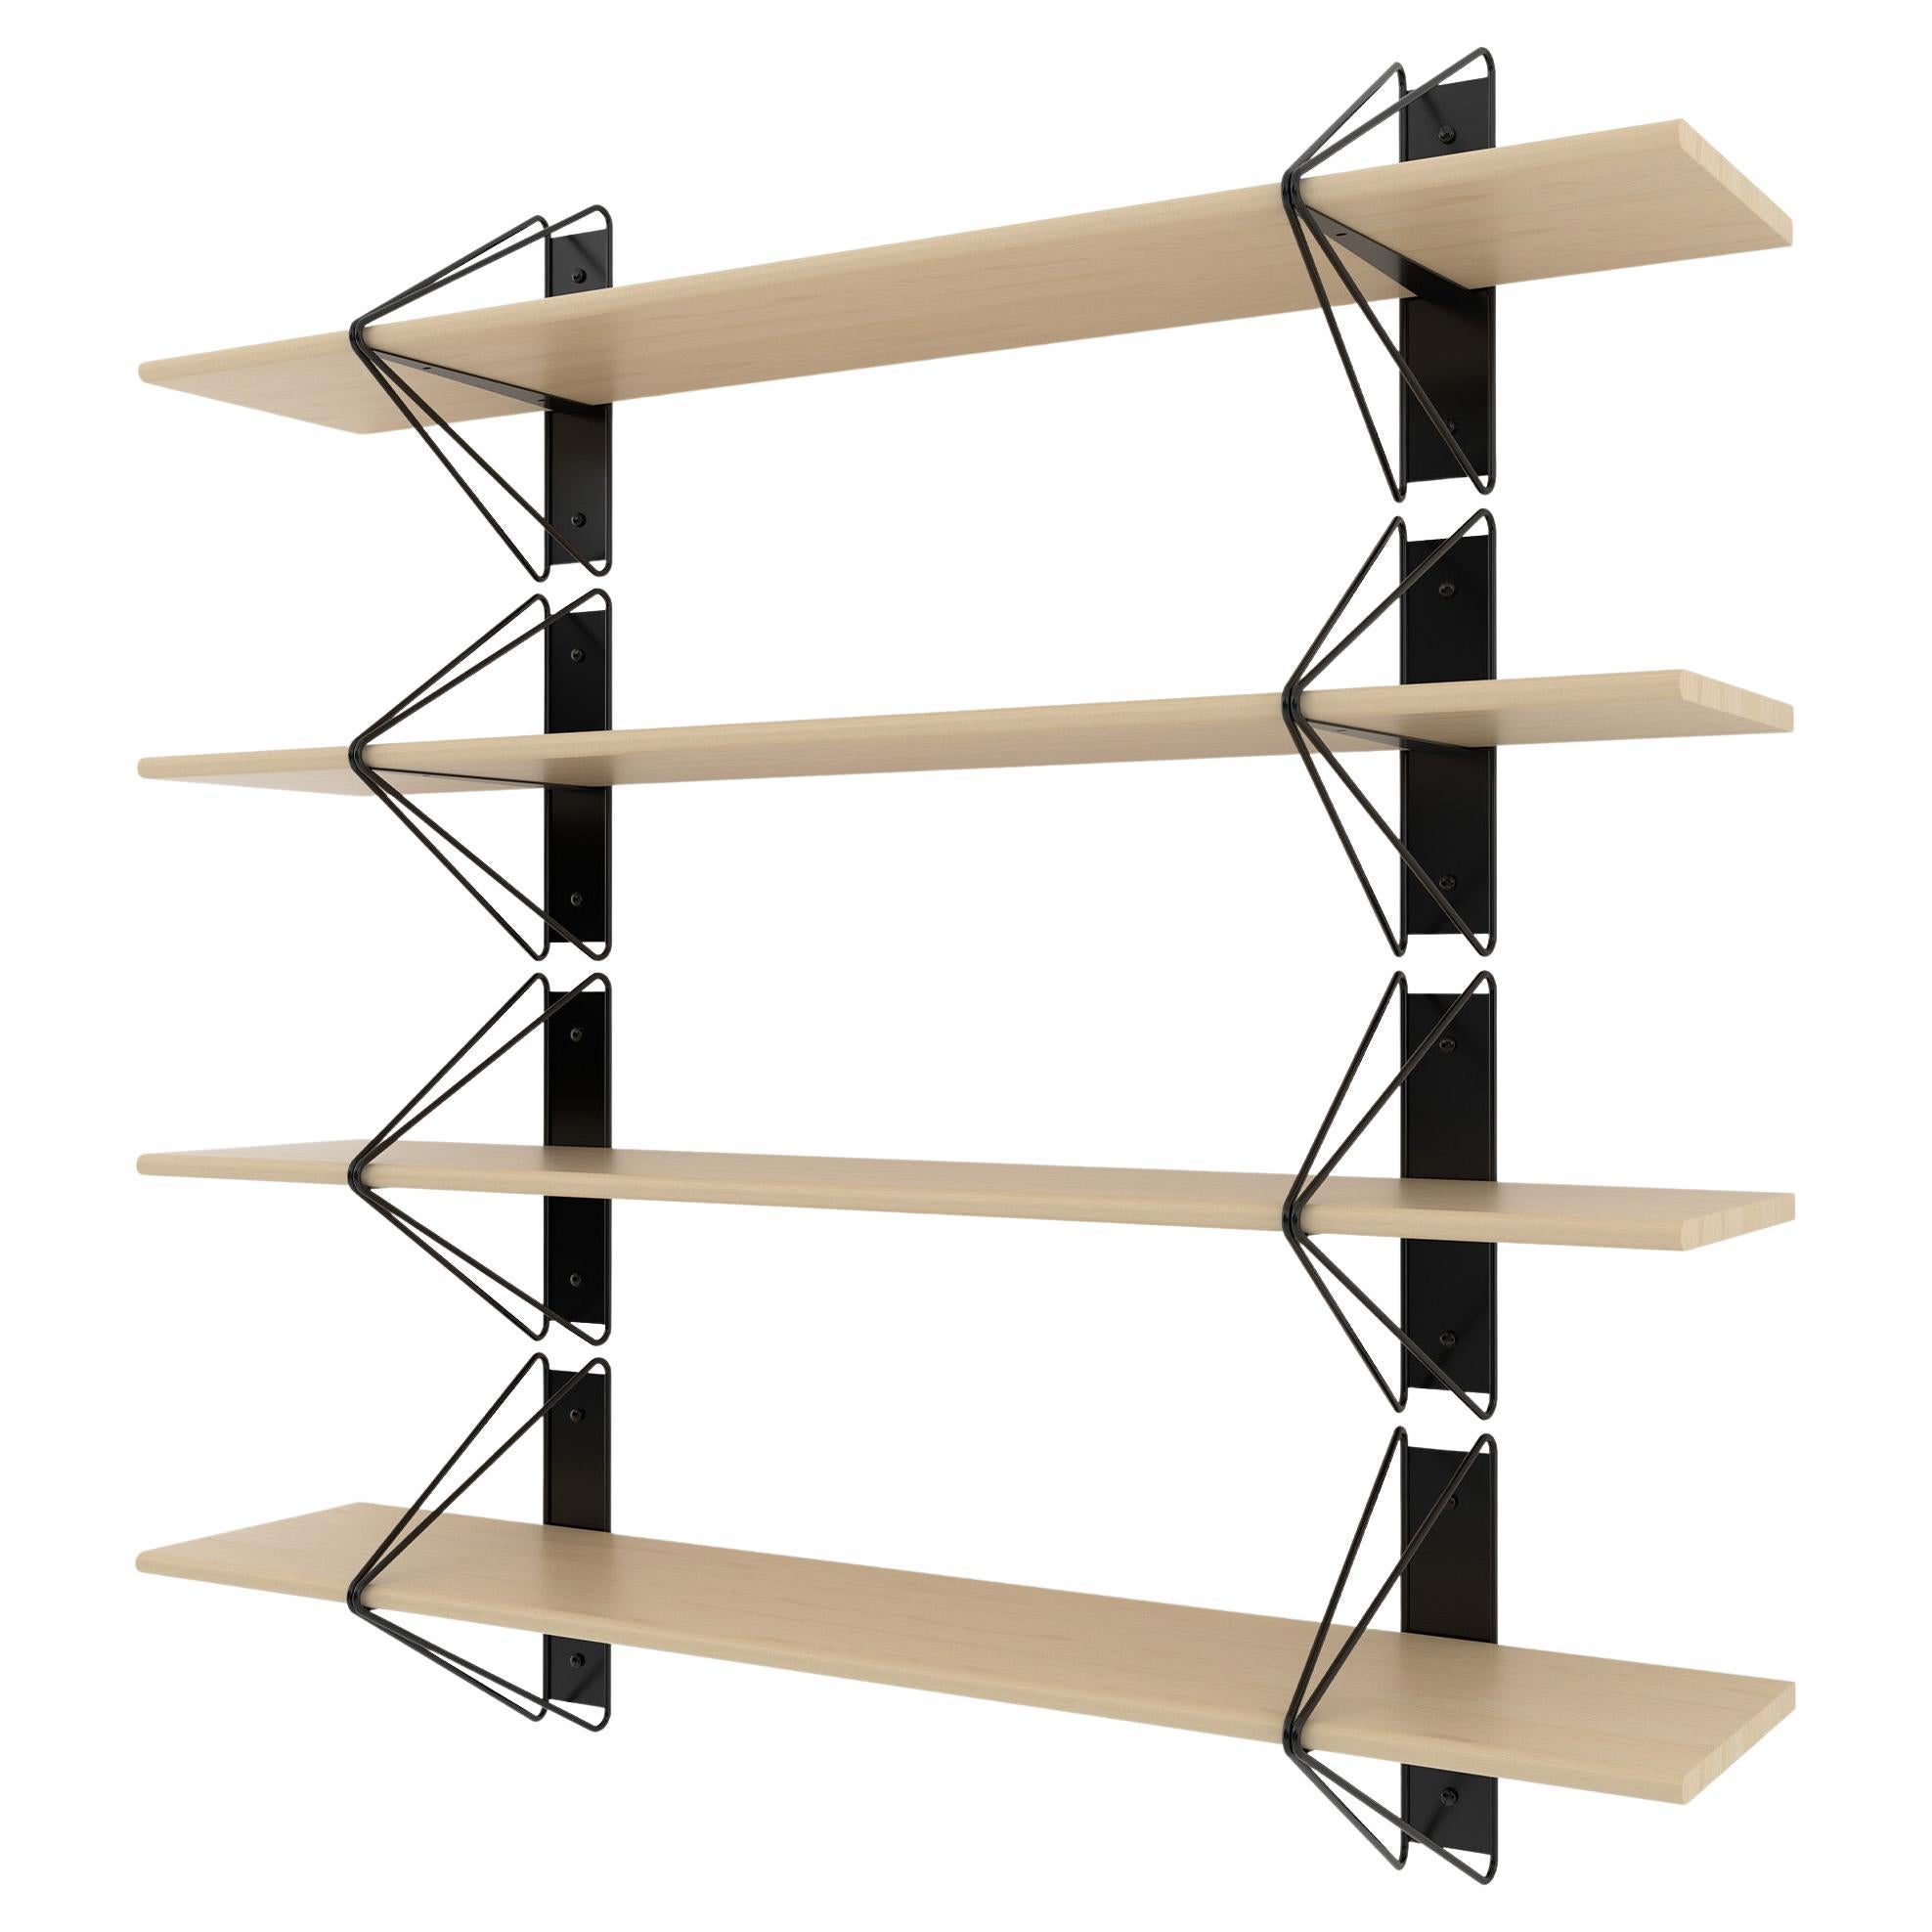 Set of 4 Strut Shelves from Souda, Black and Maple, Made to Order